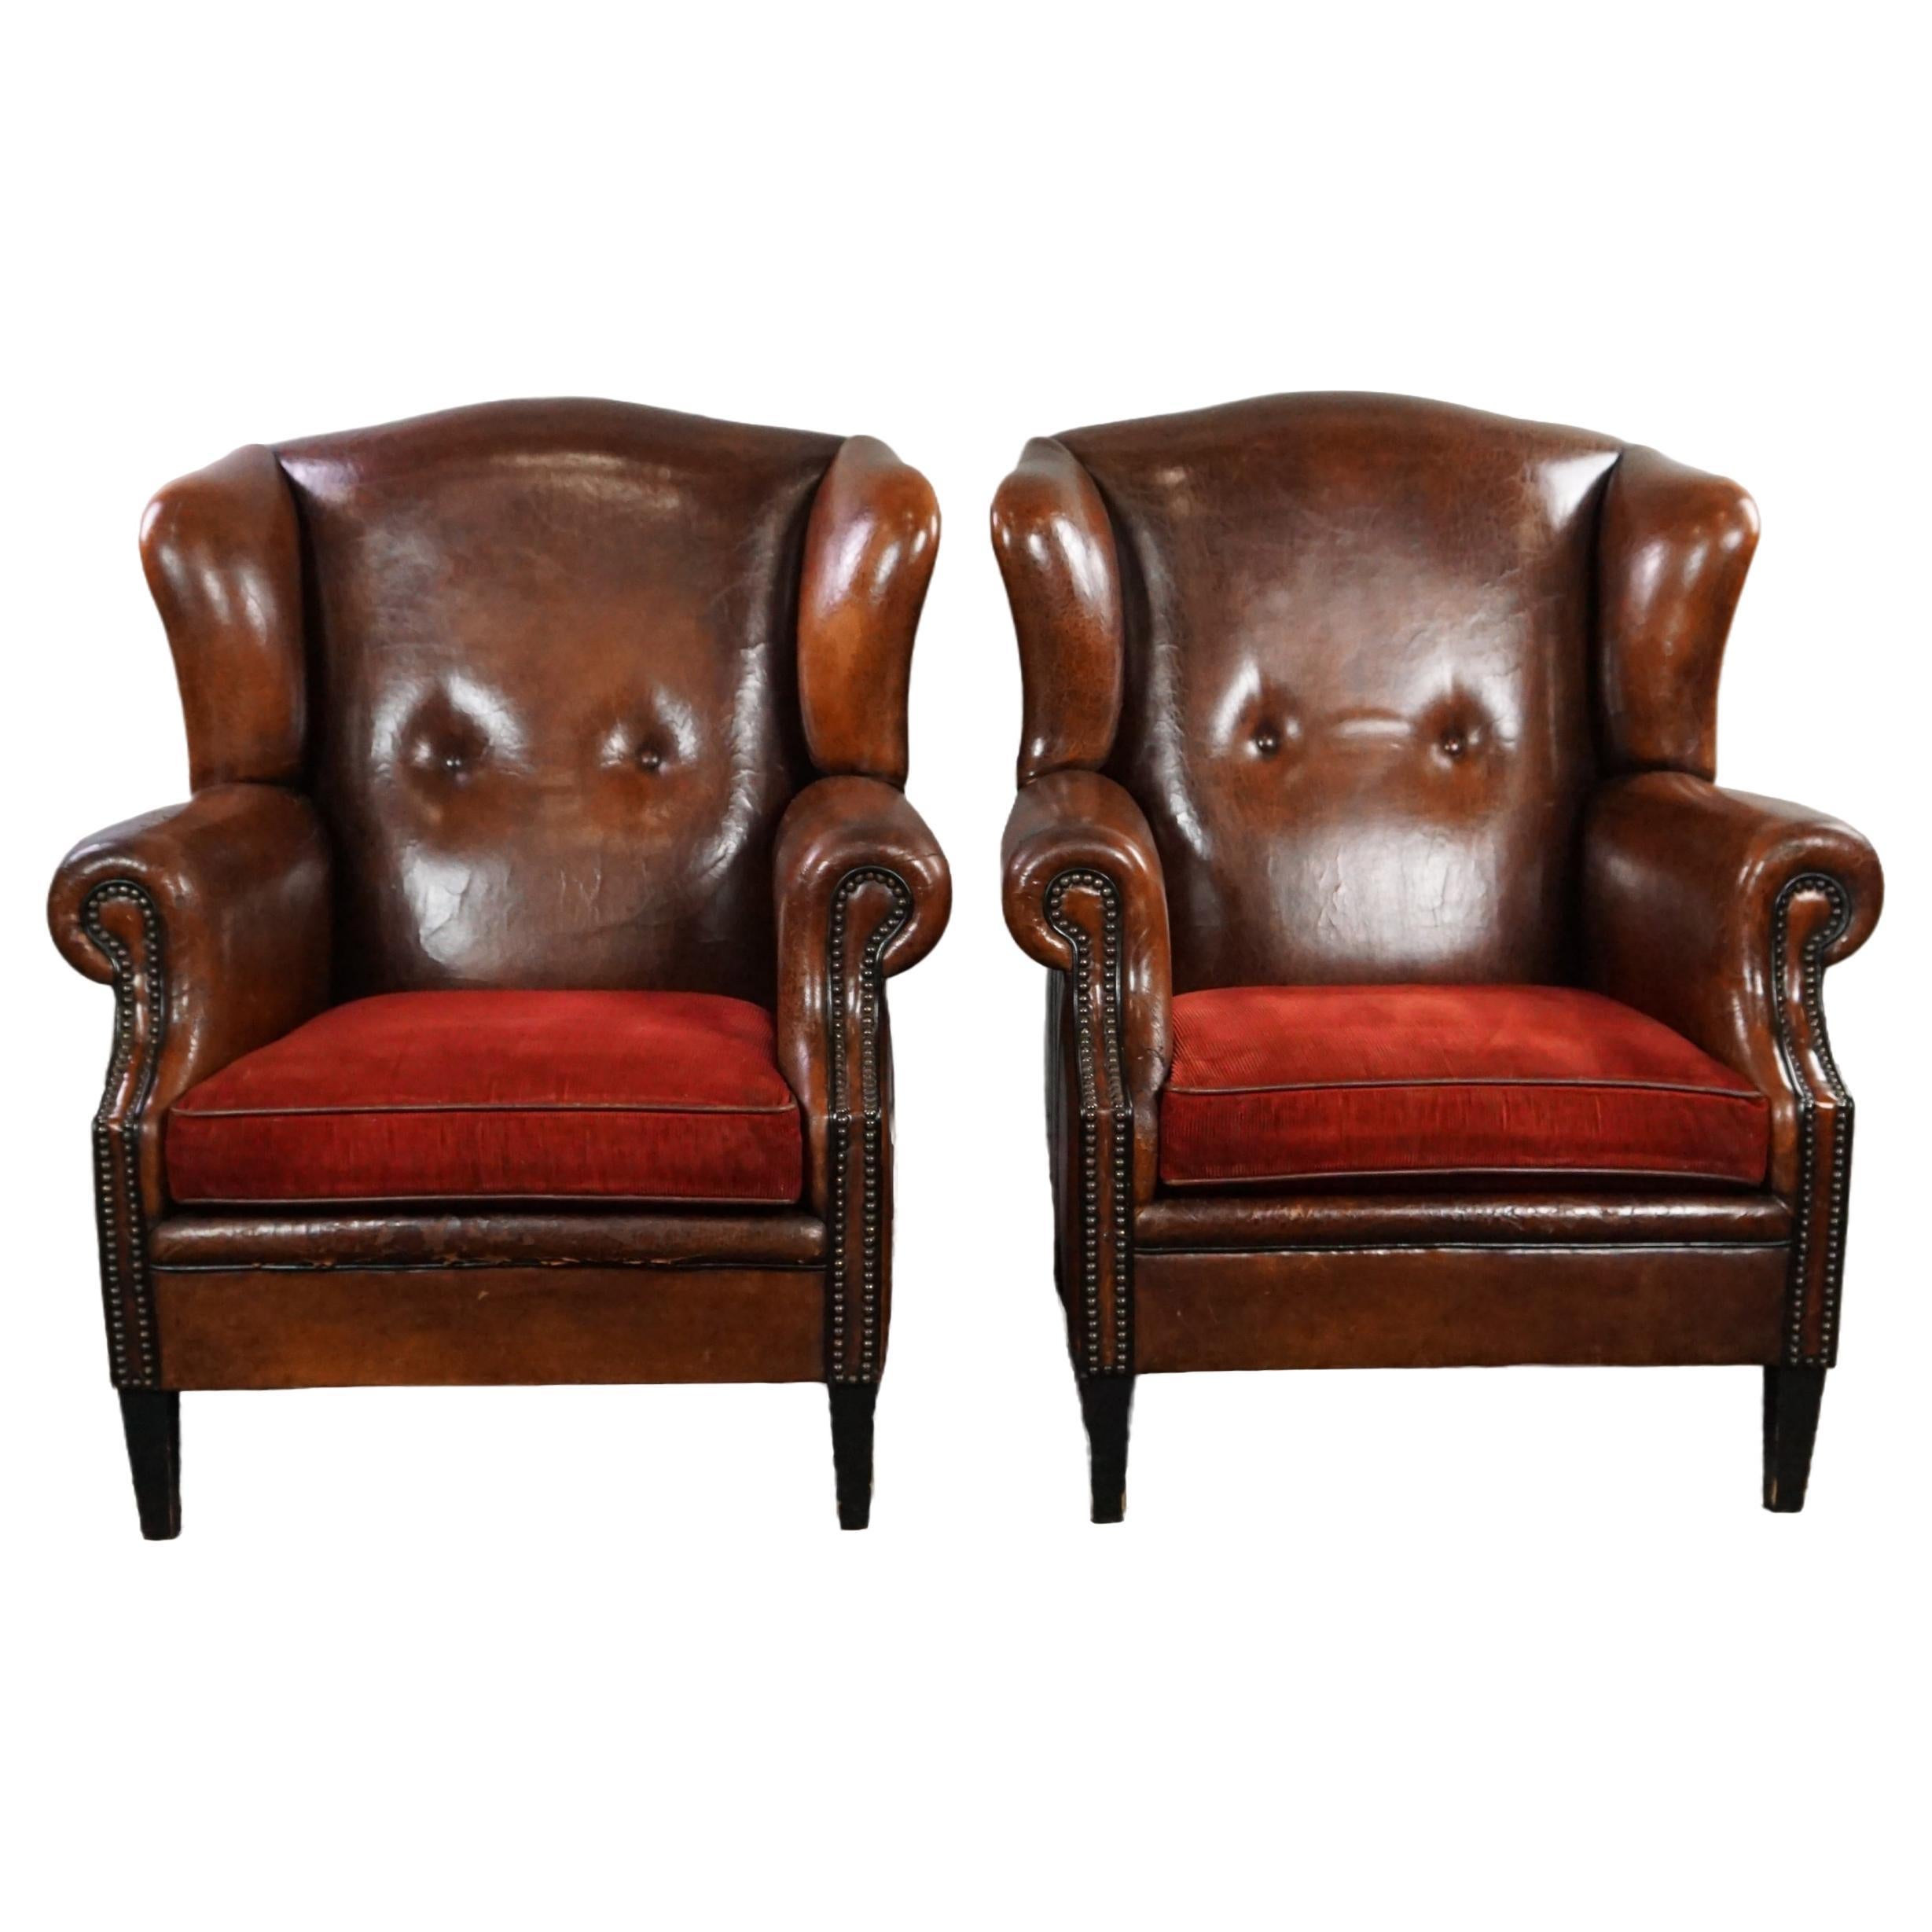 Set of two stylish sheep leather wing chairs with red corduroy seat cushions